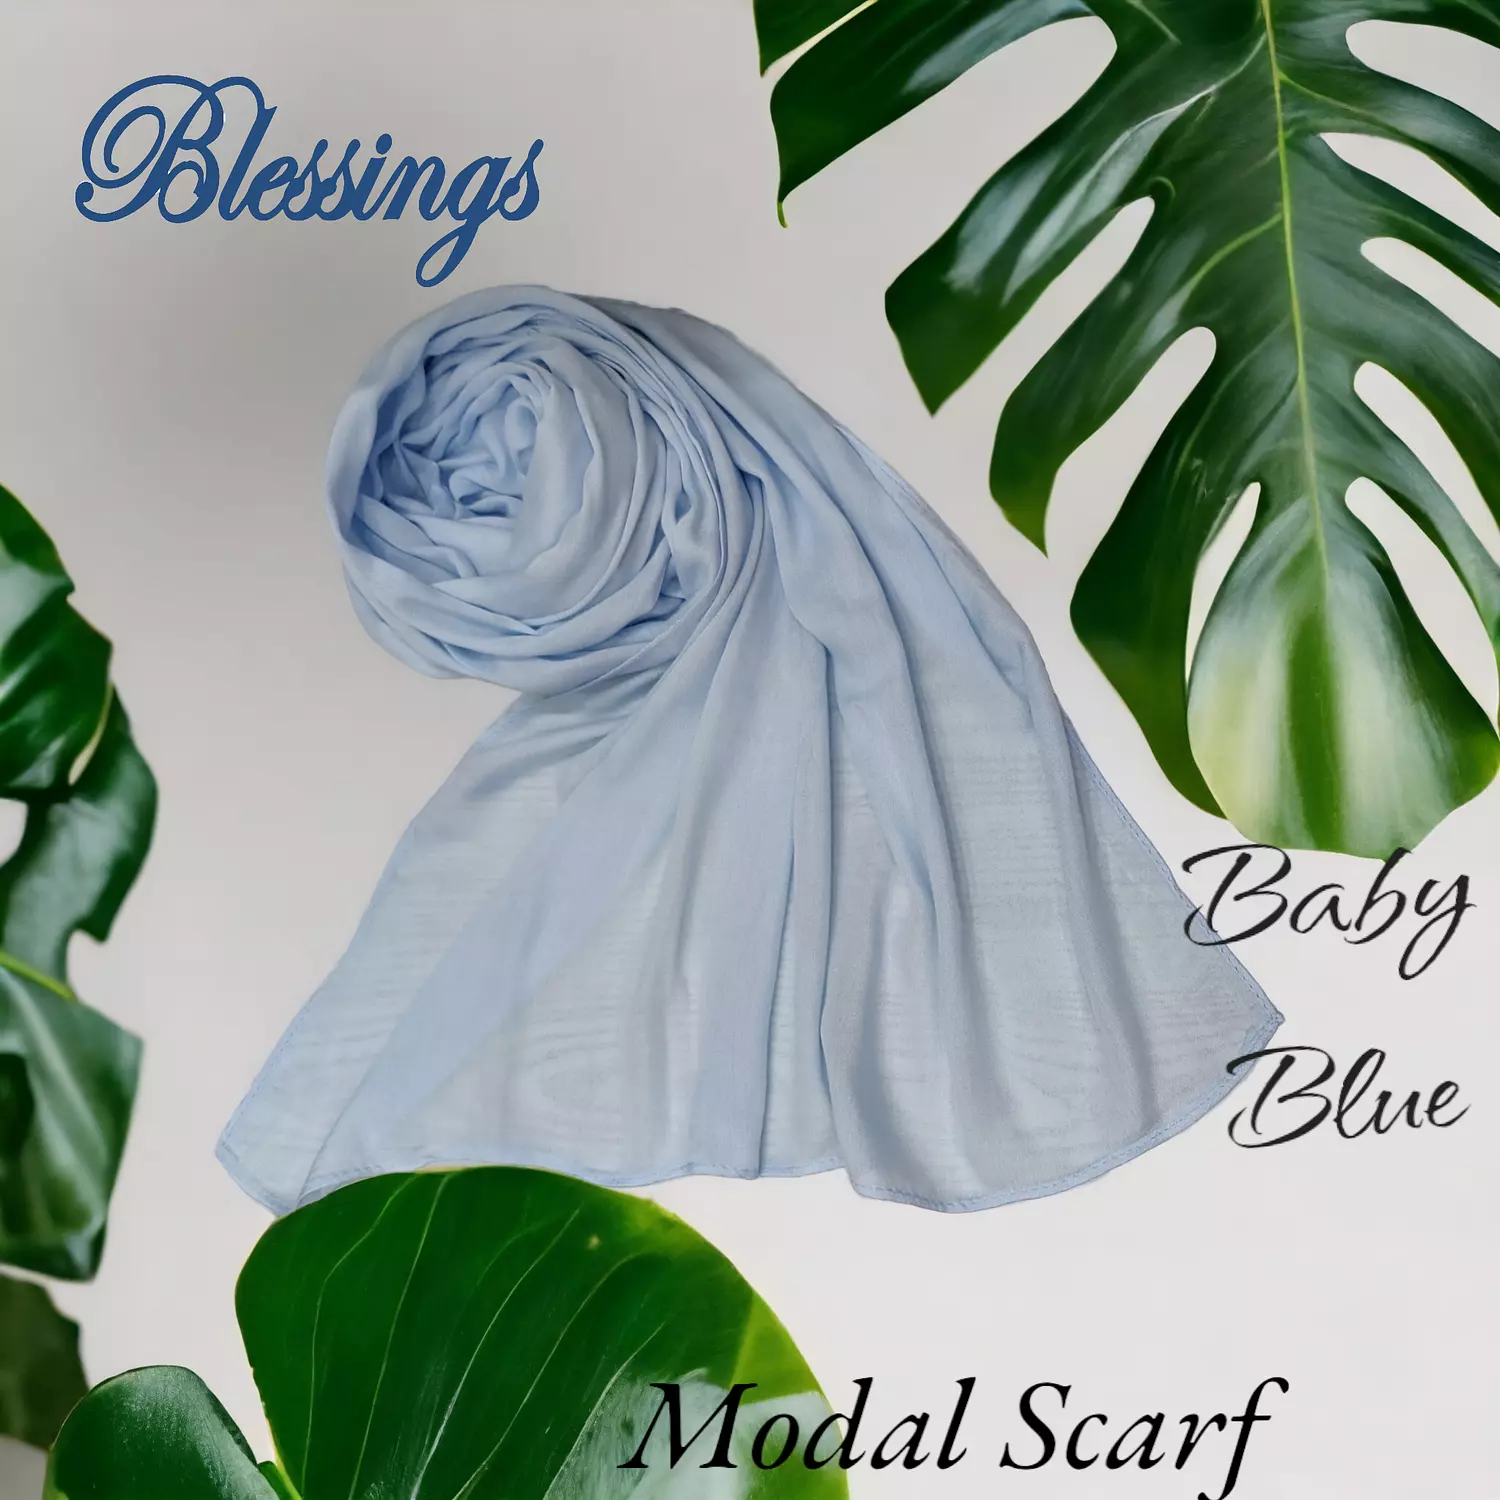 Scarf-Modal-Baby Blue hover image